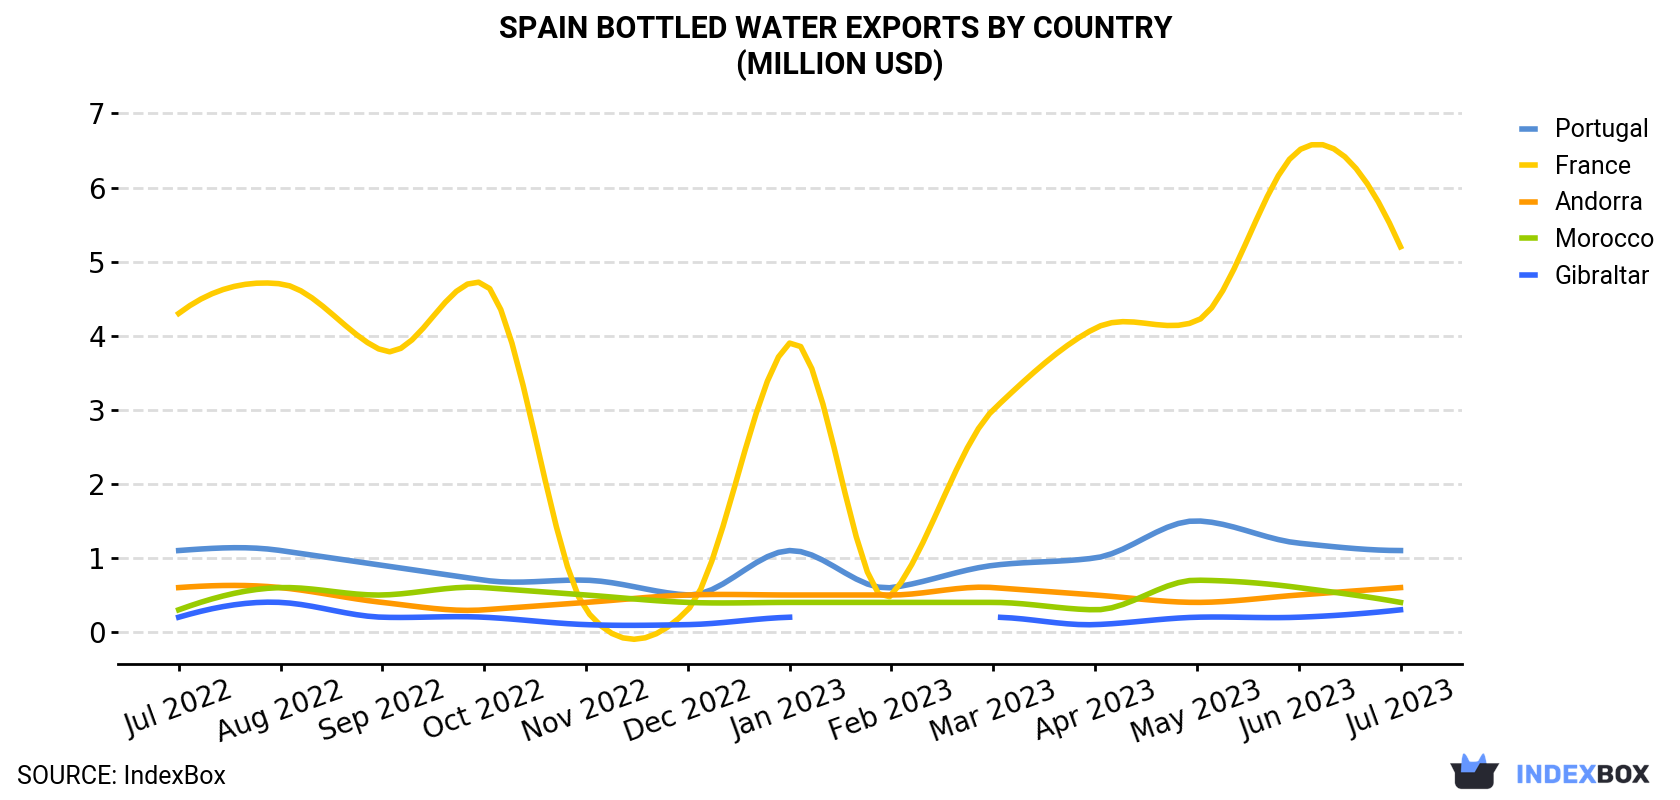 Spain Bottled Water Exports By Country (Million USD)